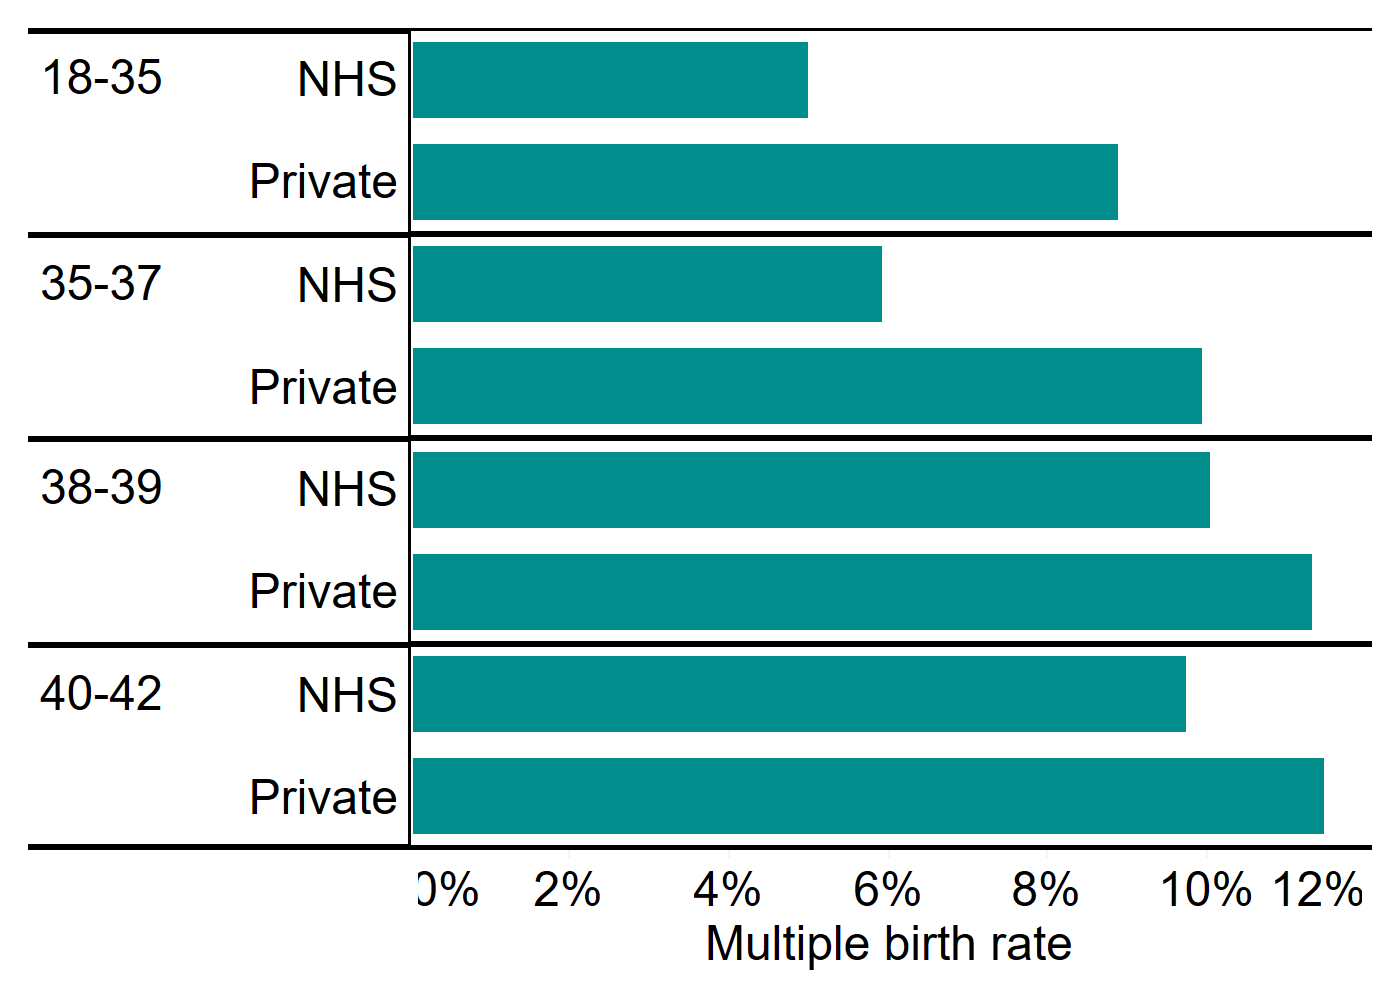 Figure 7: Average multiple birth rate on first IVF cycle by funding and patient age, 2015-2019. Average multiple birth rate on first IVF cycle by embryos transferred, funding and patient age, 2015-2019. This bar chart shows the average multiple birth rate on first IVF cycle by NHS or private funding for banded age groups; 18-35, 35-37, 38-39, 40-42, from 2015-2019. For patients 37 and under, there is a greater average multiple birth rate in private funded IVF than NHS. An accessible form of the underlying data for this figure can be downloaded beneath the image in .xls format.